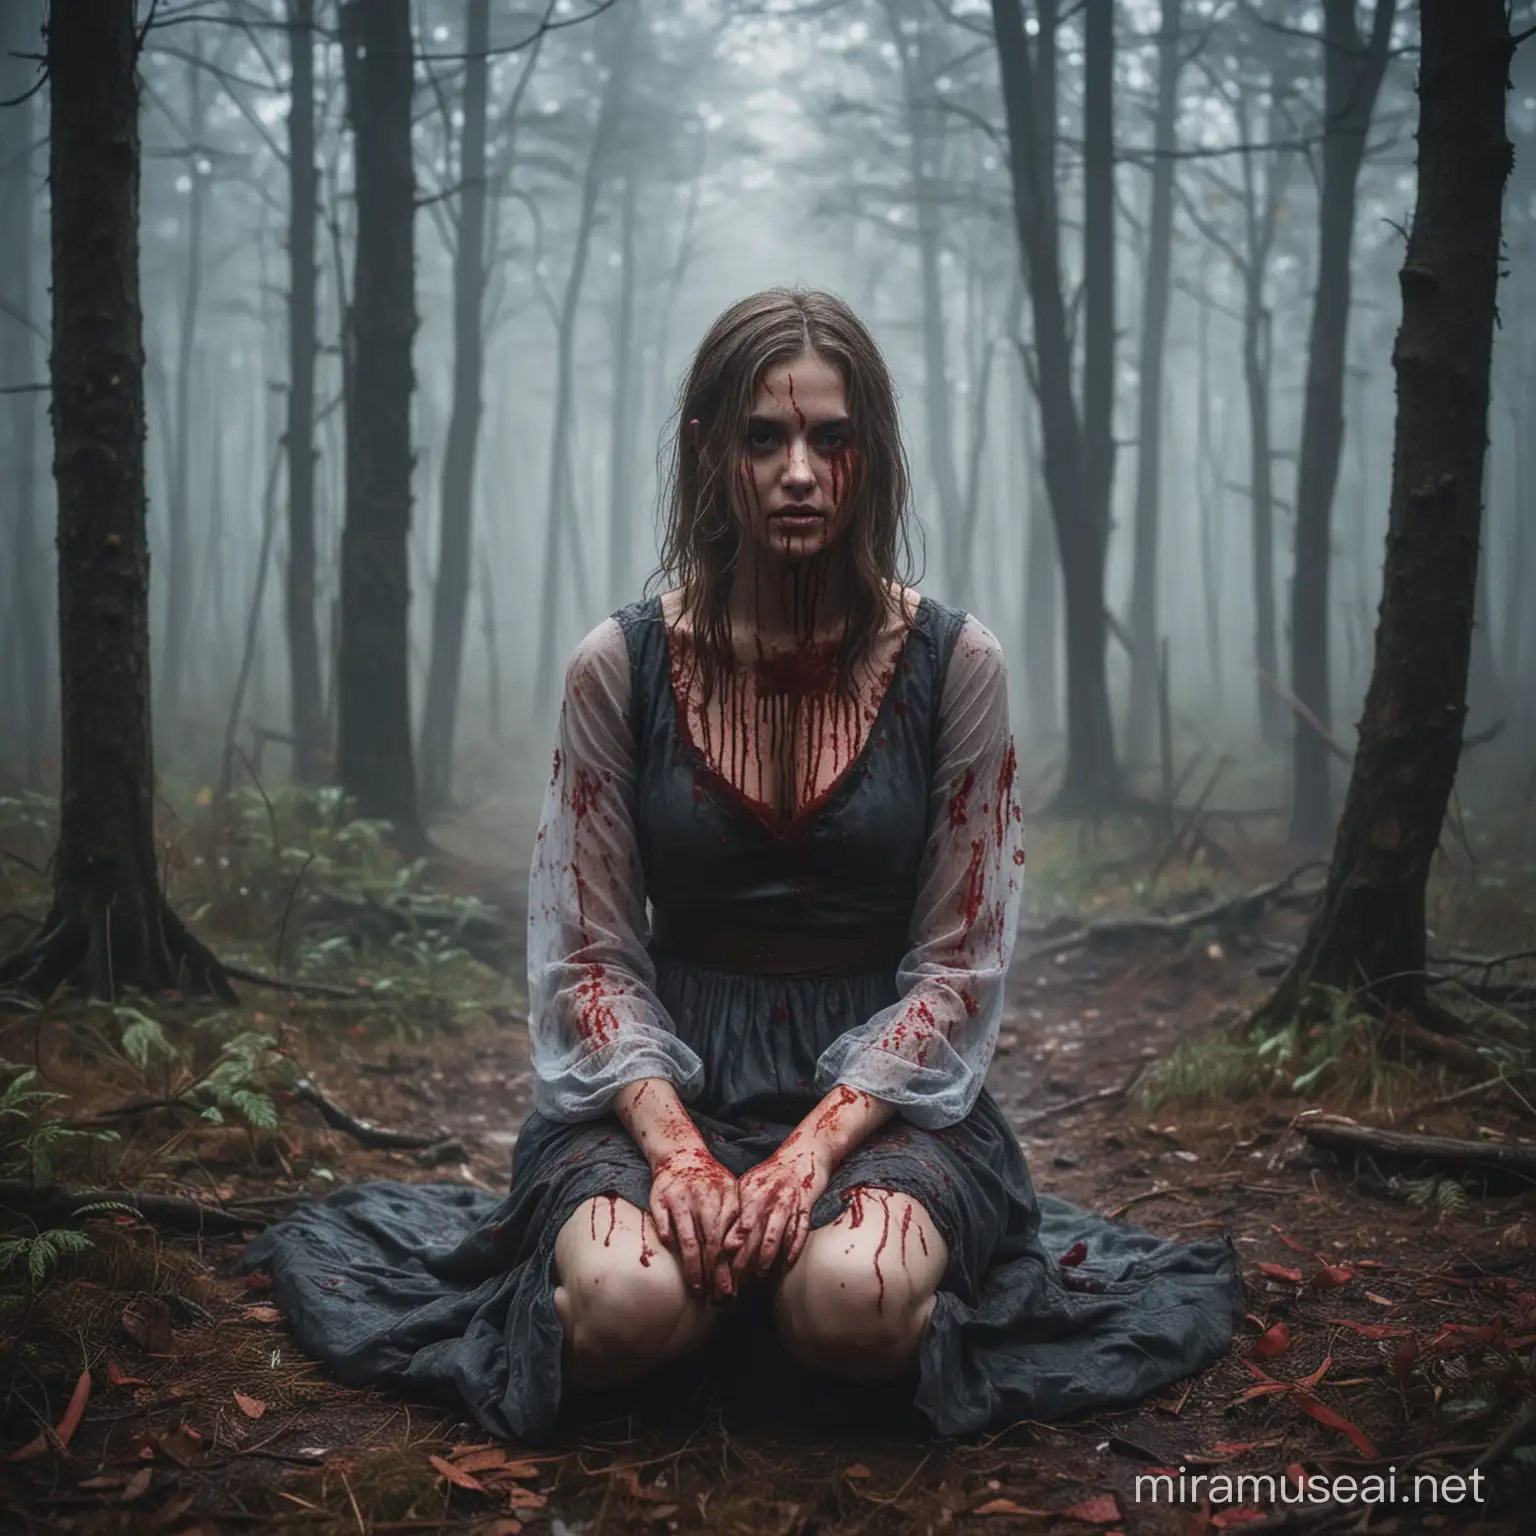 Girl Sitting in Enigmatic Forest Amidst Blood